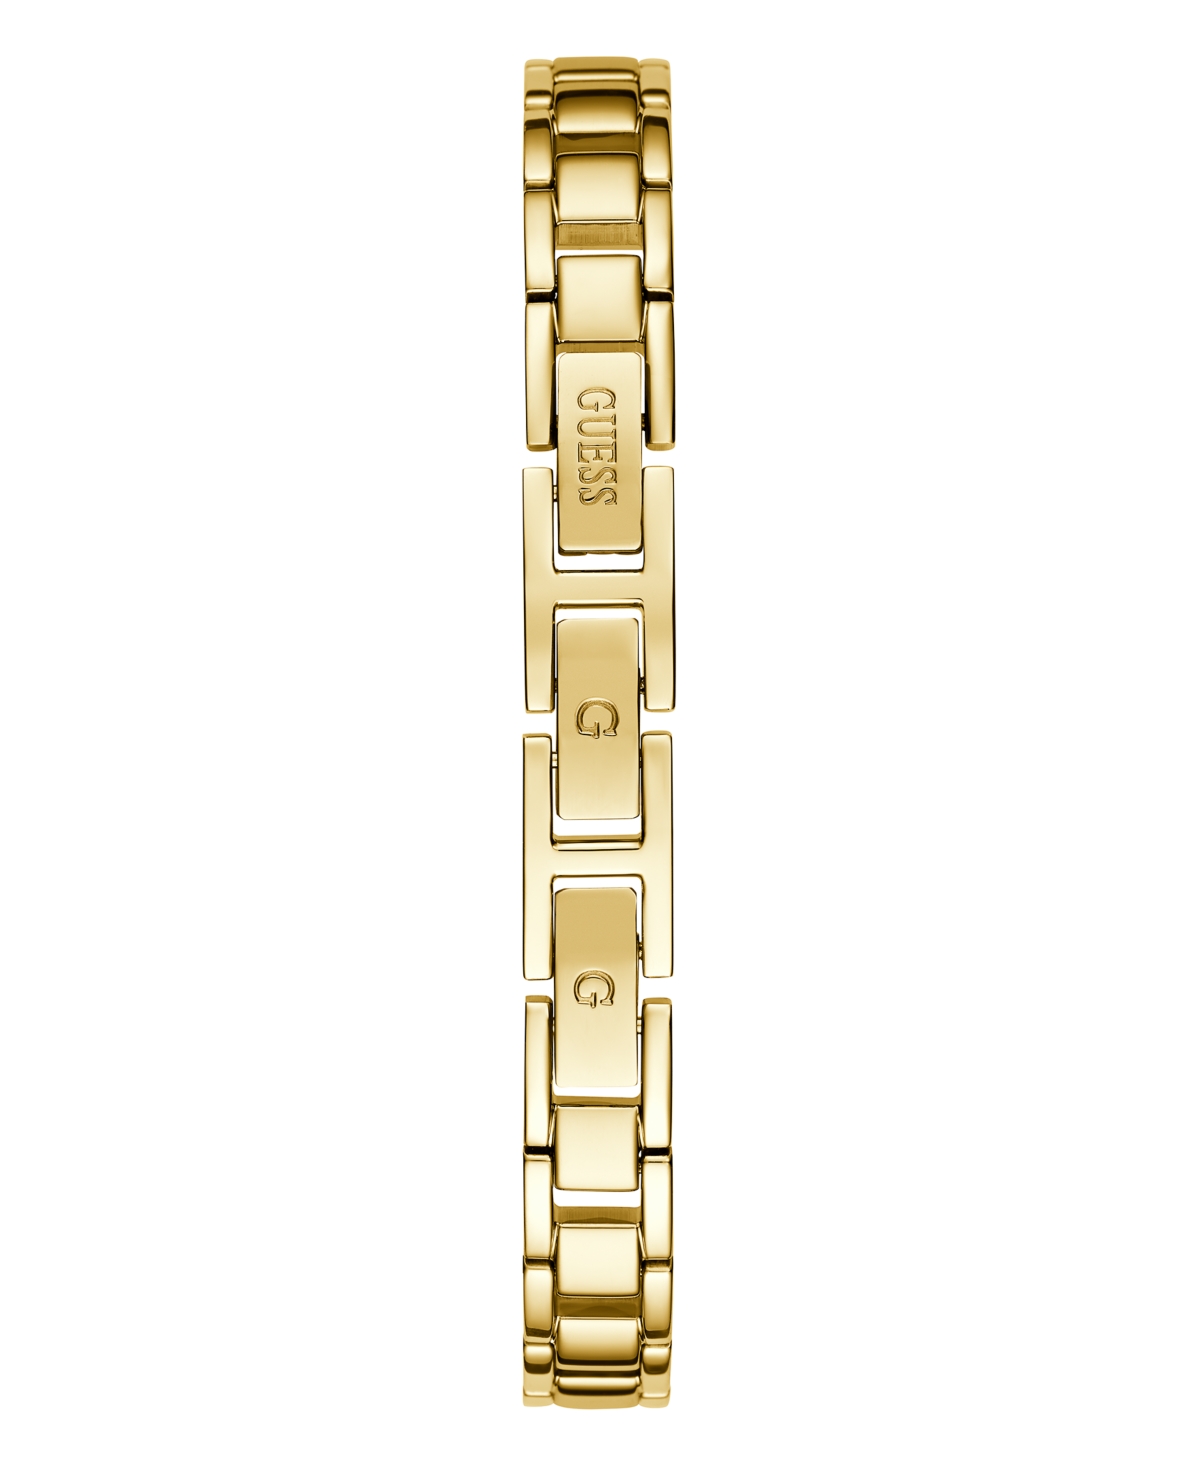 Shop Guess Women's Analog Gold-tone Stainless Steel Watch 26mm